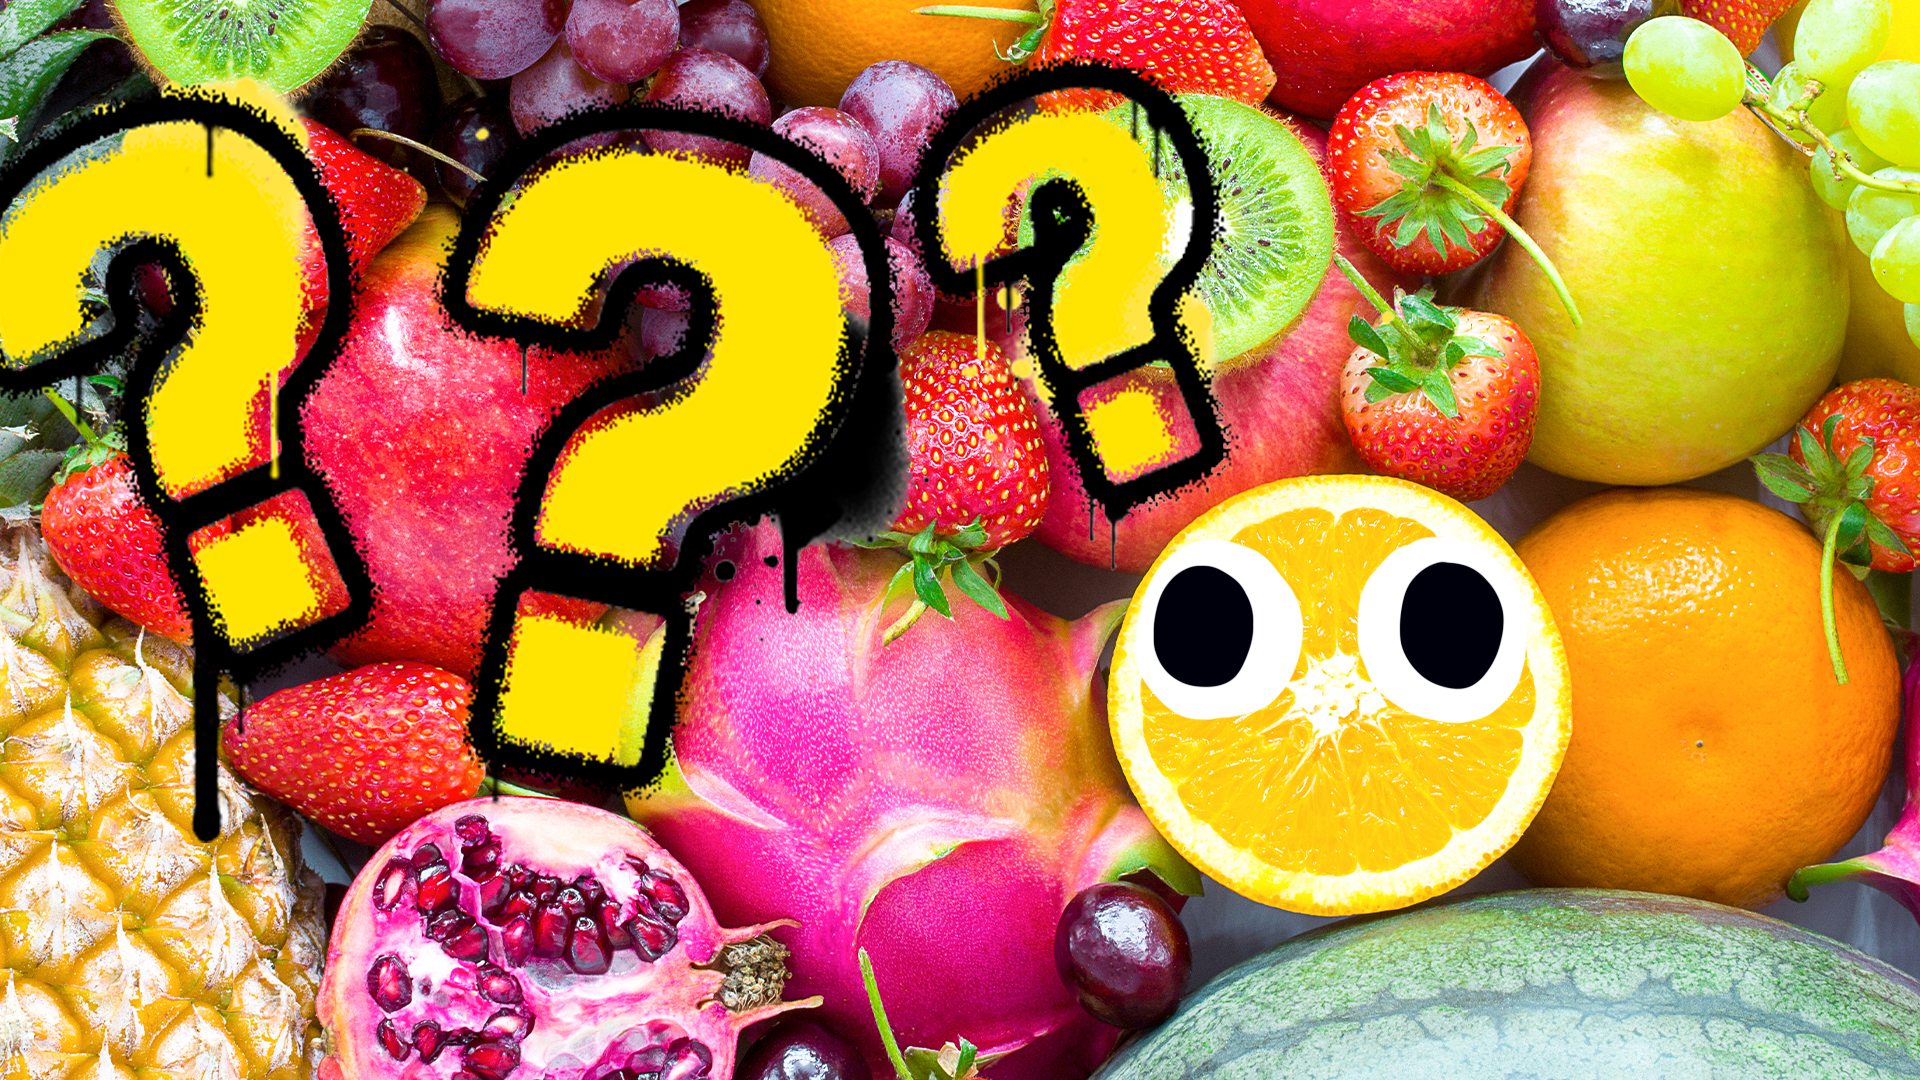 Fruit background with eyes and question marks